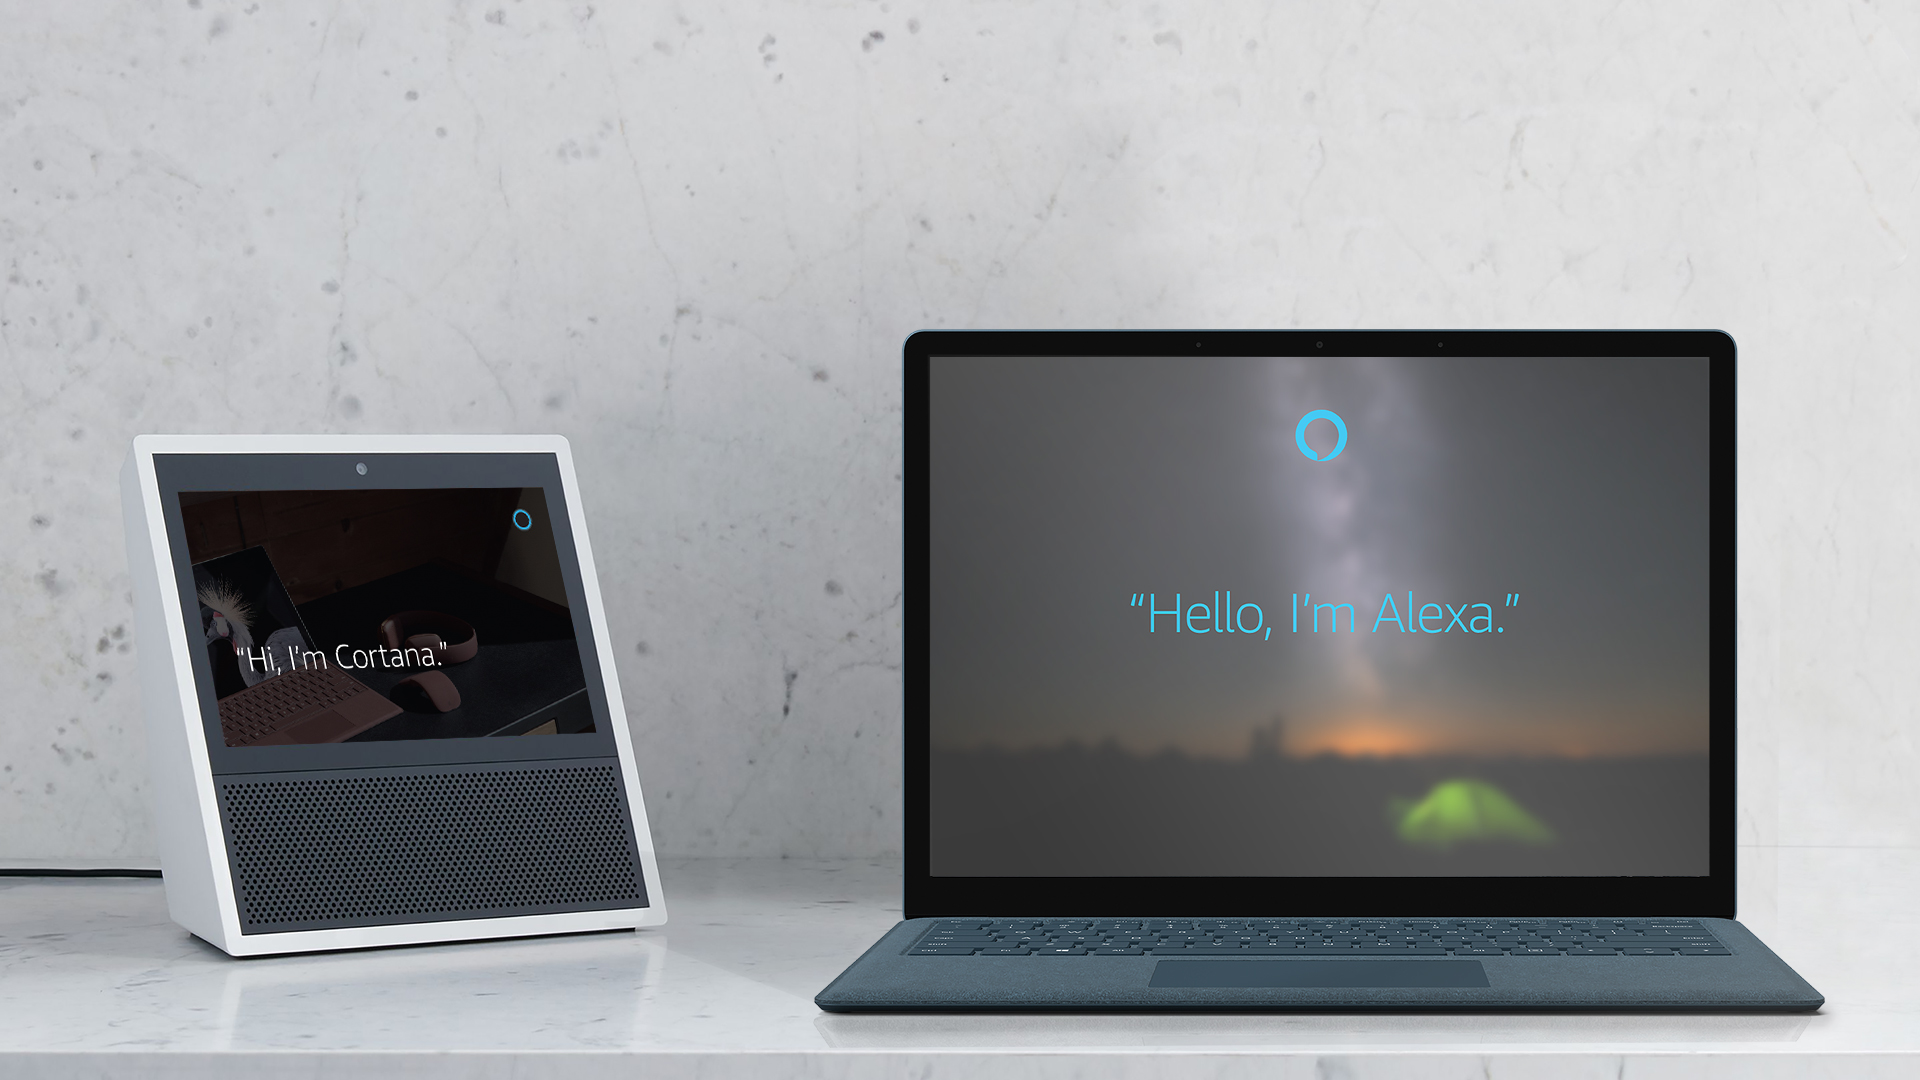 Photo shows the words “Hi, I’m Cortana” on the screen of an Amazon Echo Show device next to a laptop that displays the words “Hello, I’m Alexa”